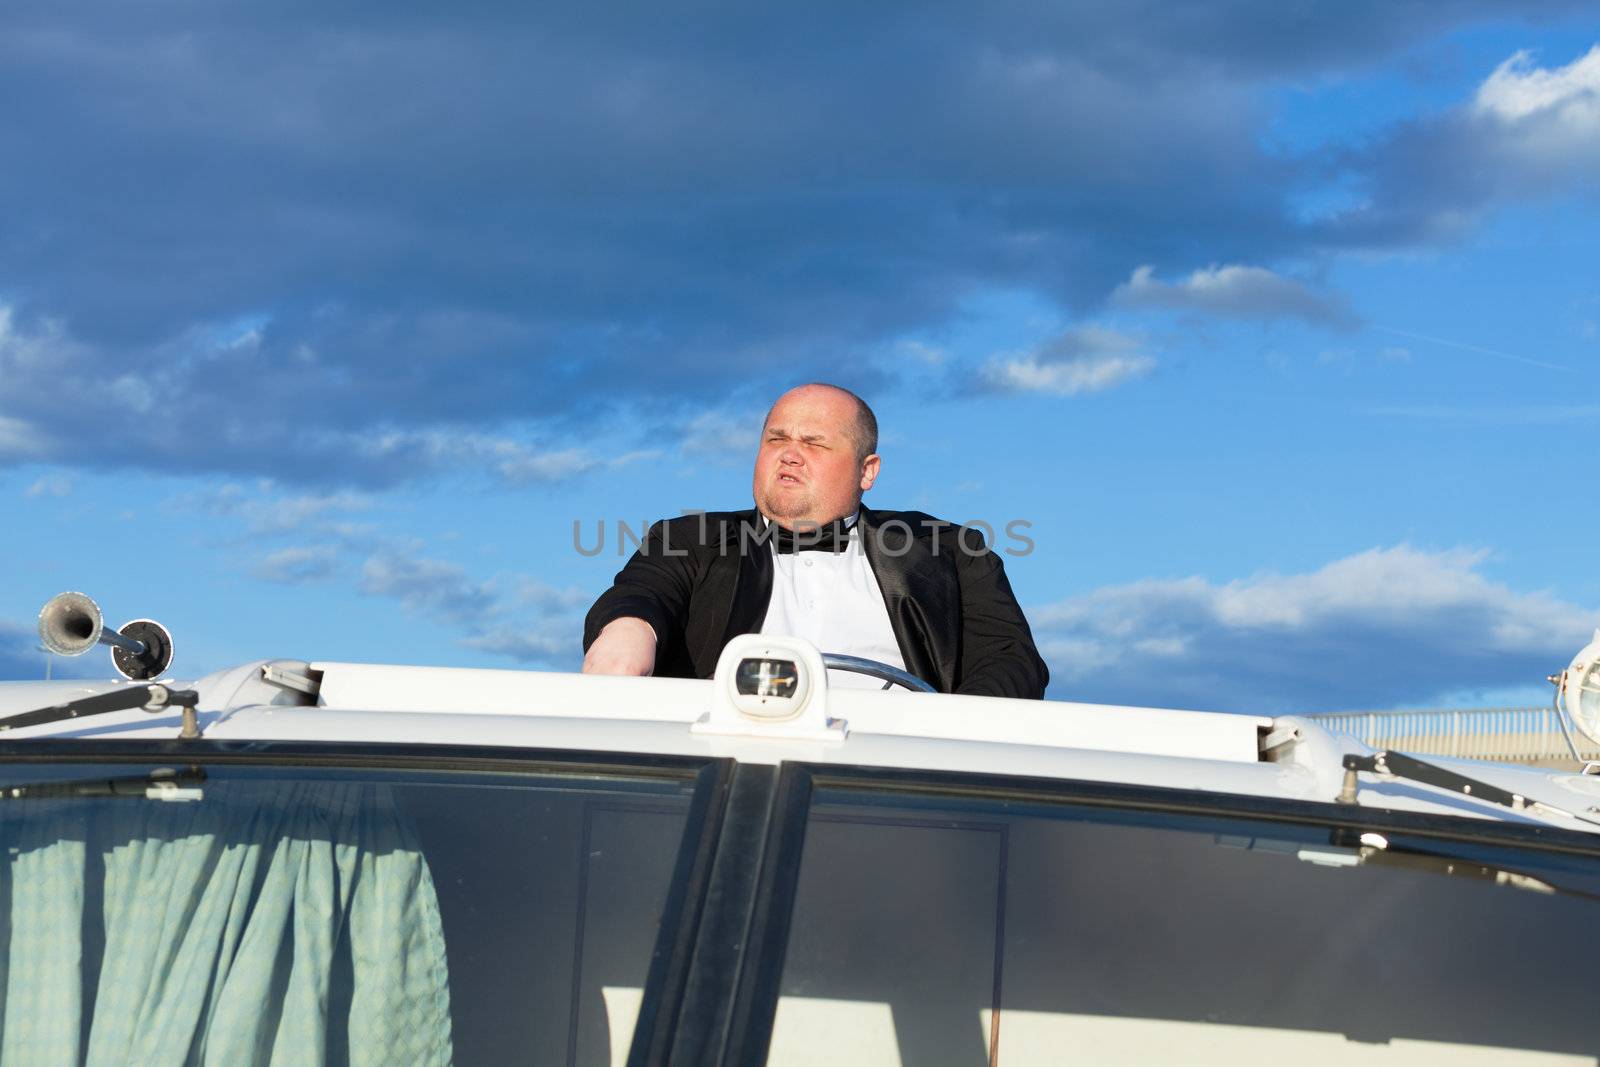 Overweight man in a tuxedo at the helm of a pleasure boat by Discovod